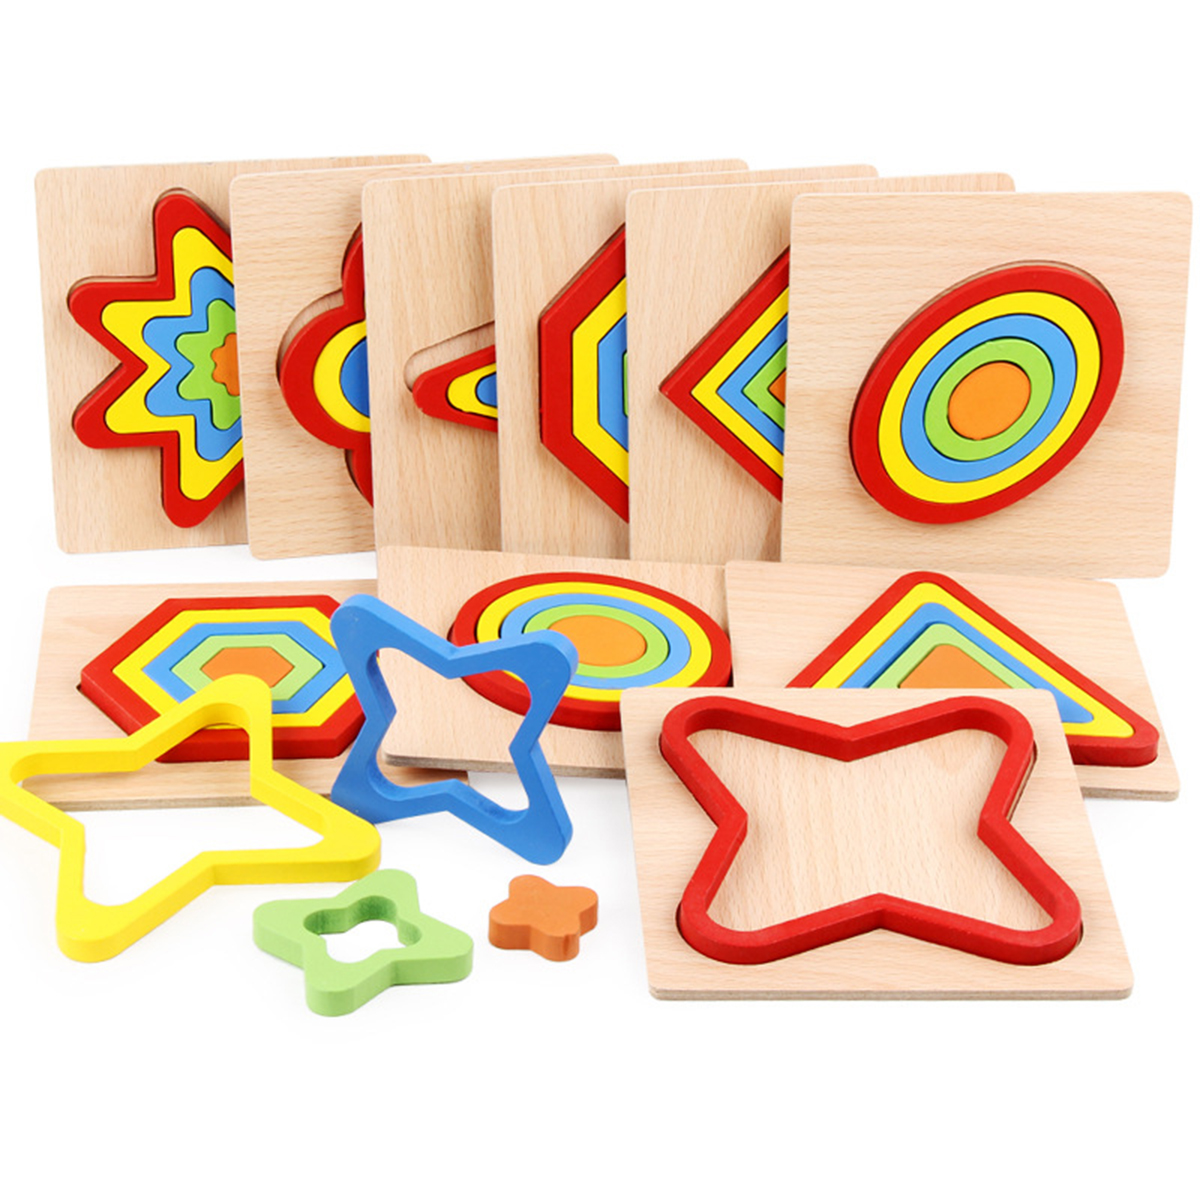 Shape Cognition Board Geometry Jigsaw Puzzle Wooden Kids Educational Learning Toys 13